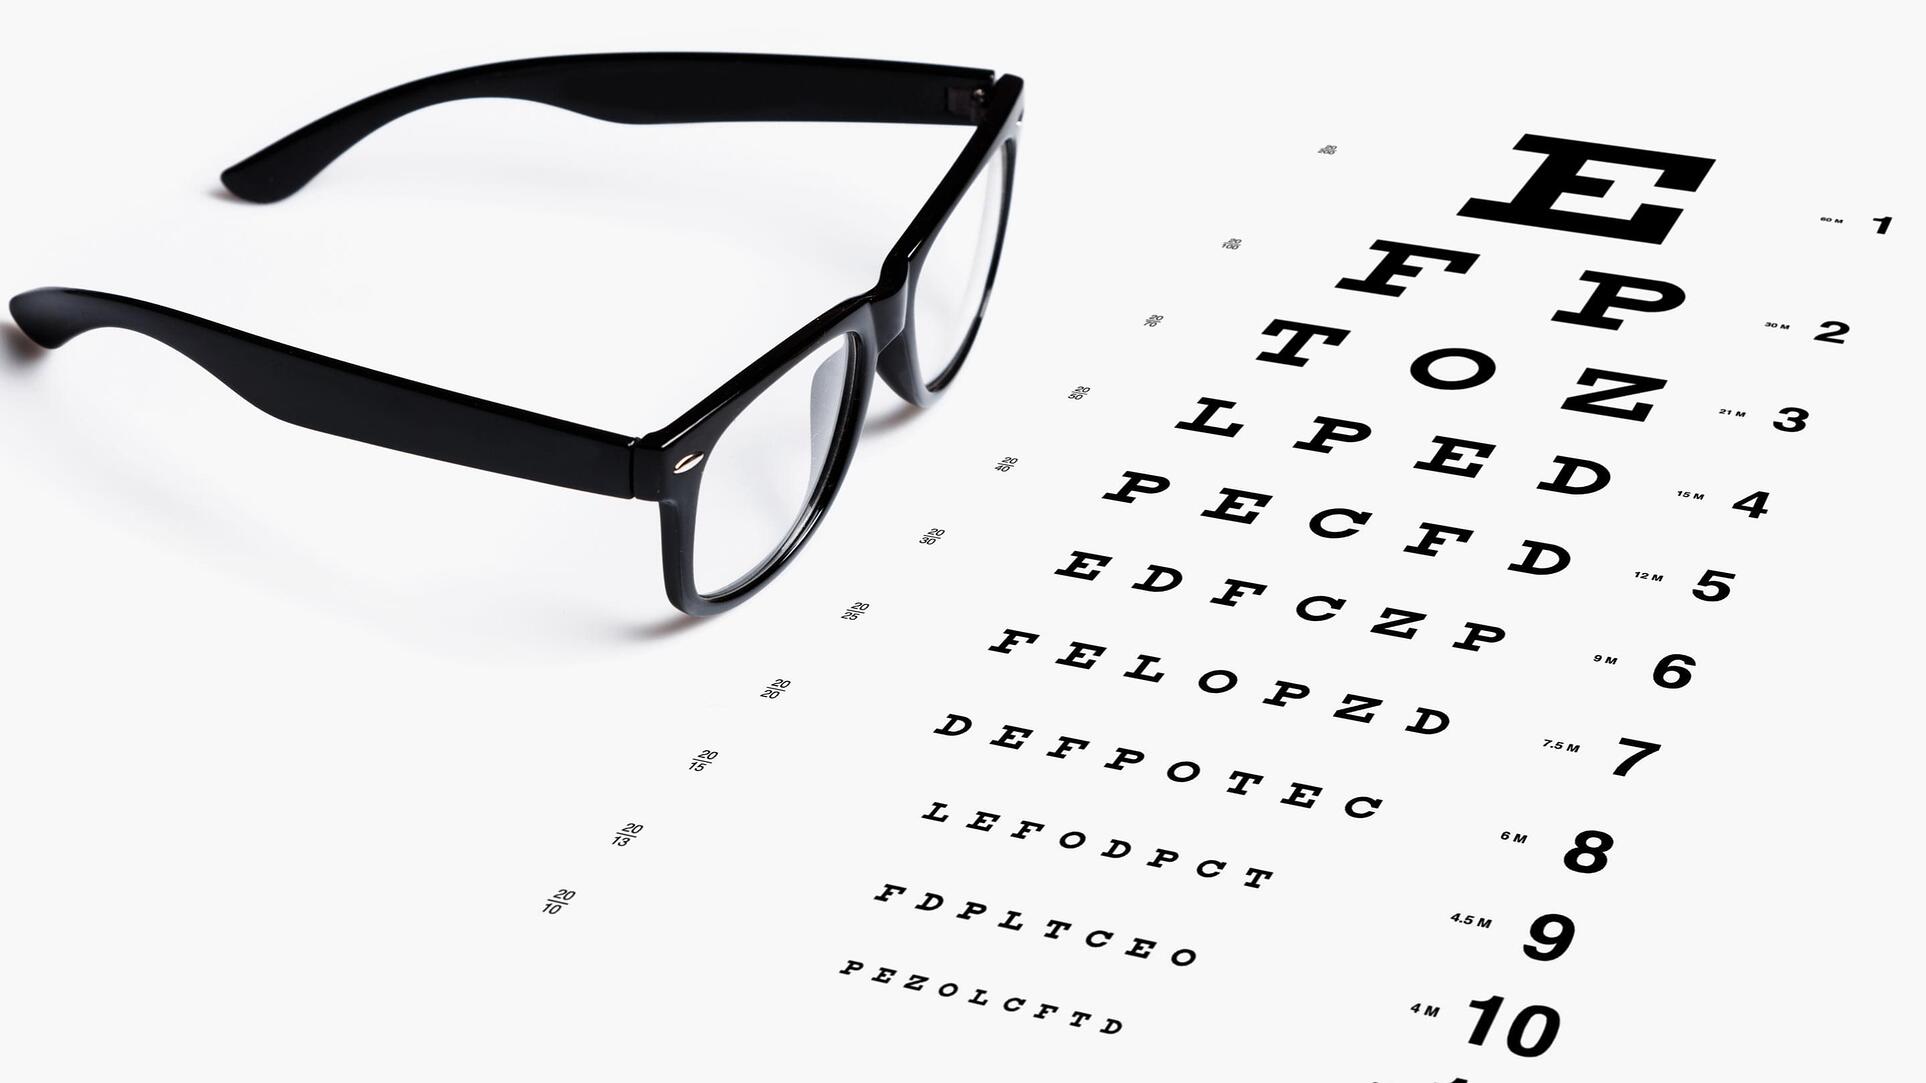 The snellen chart has a series of letters and numbers that gradually get smaller as you move your eyes down the chart.